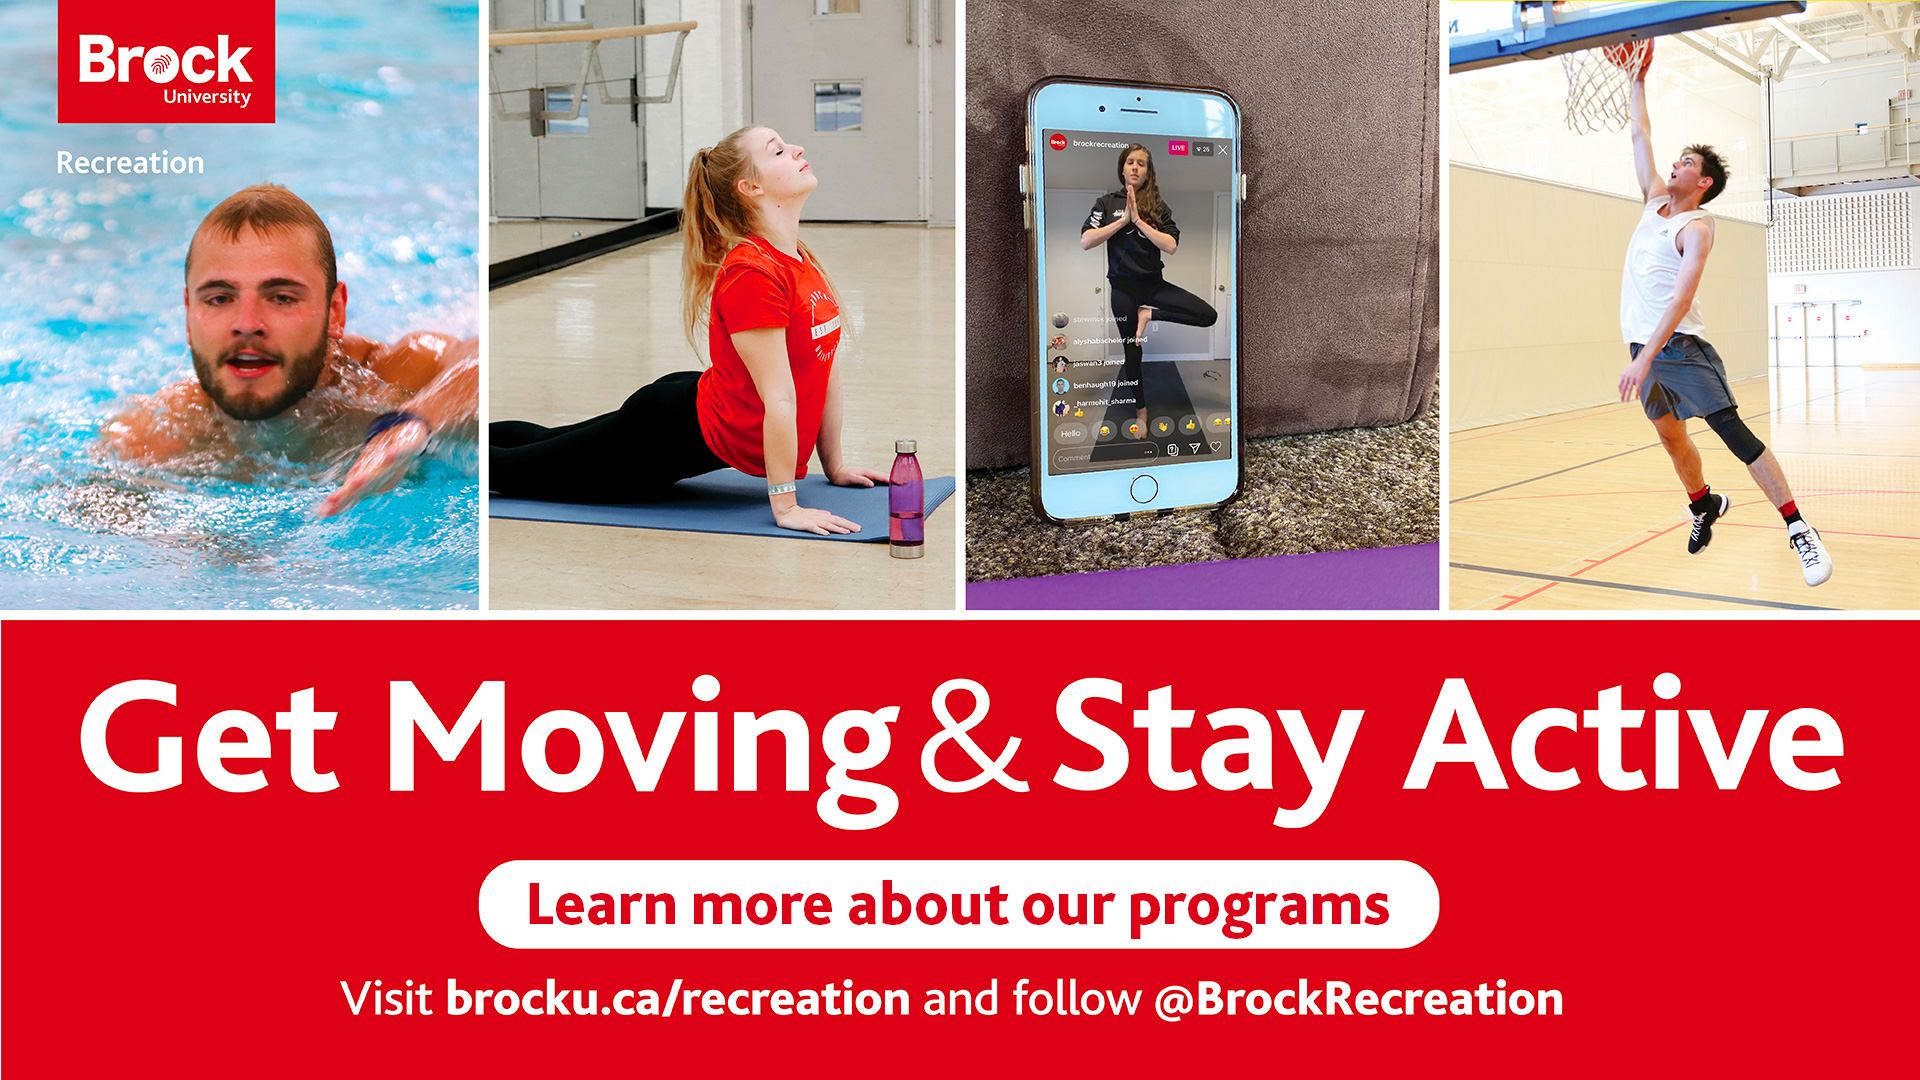 Get moving and stay active - Learn more about our Programs at brocku.ca/recreation